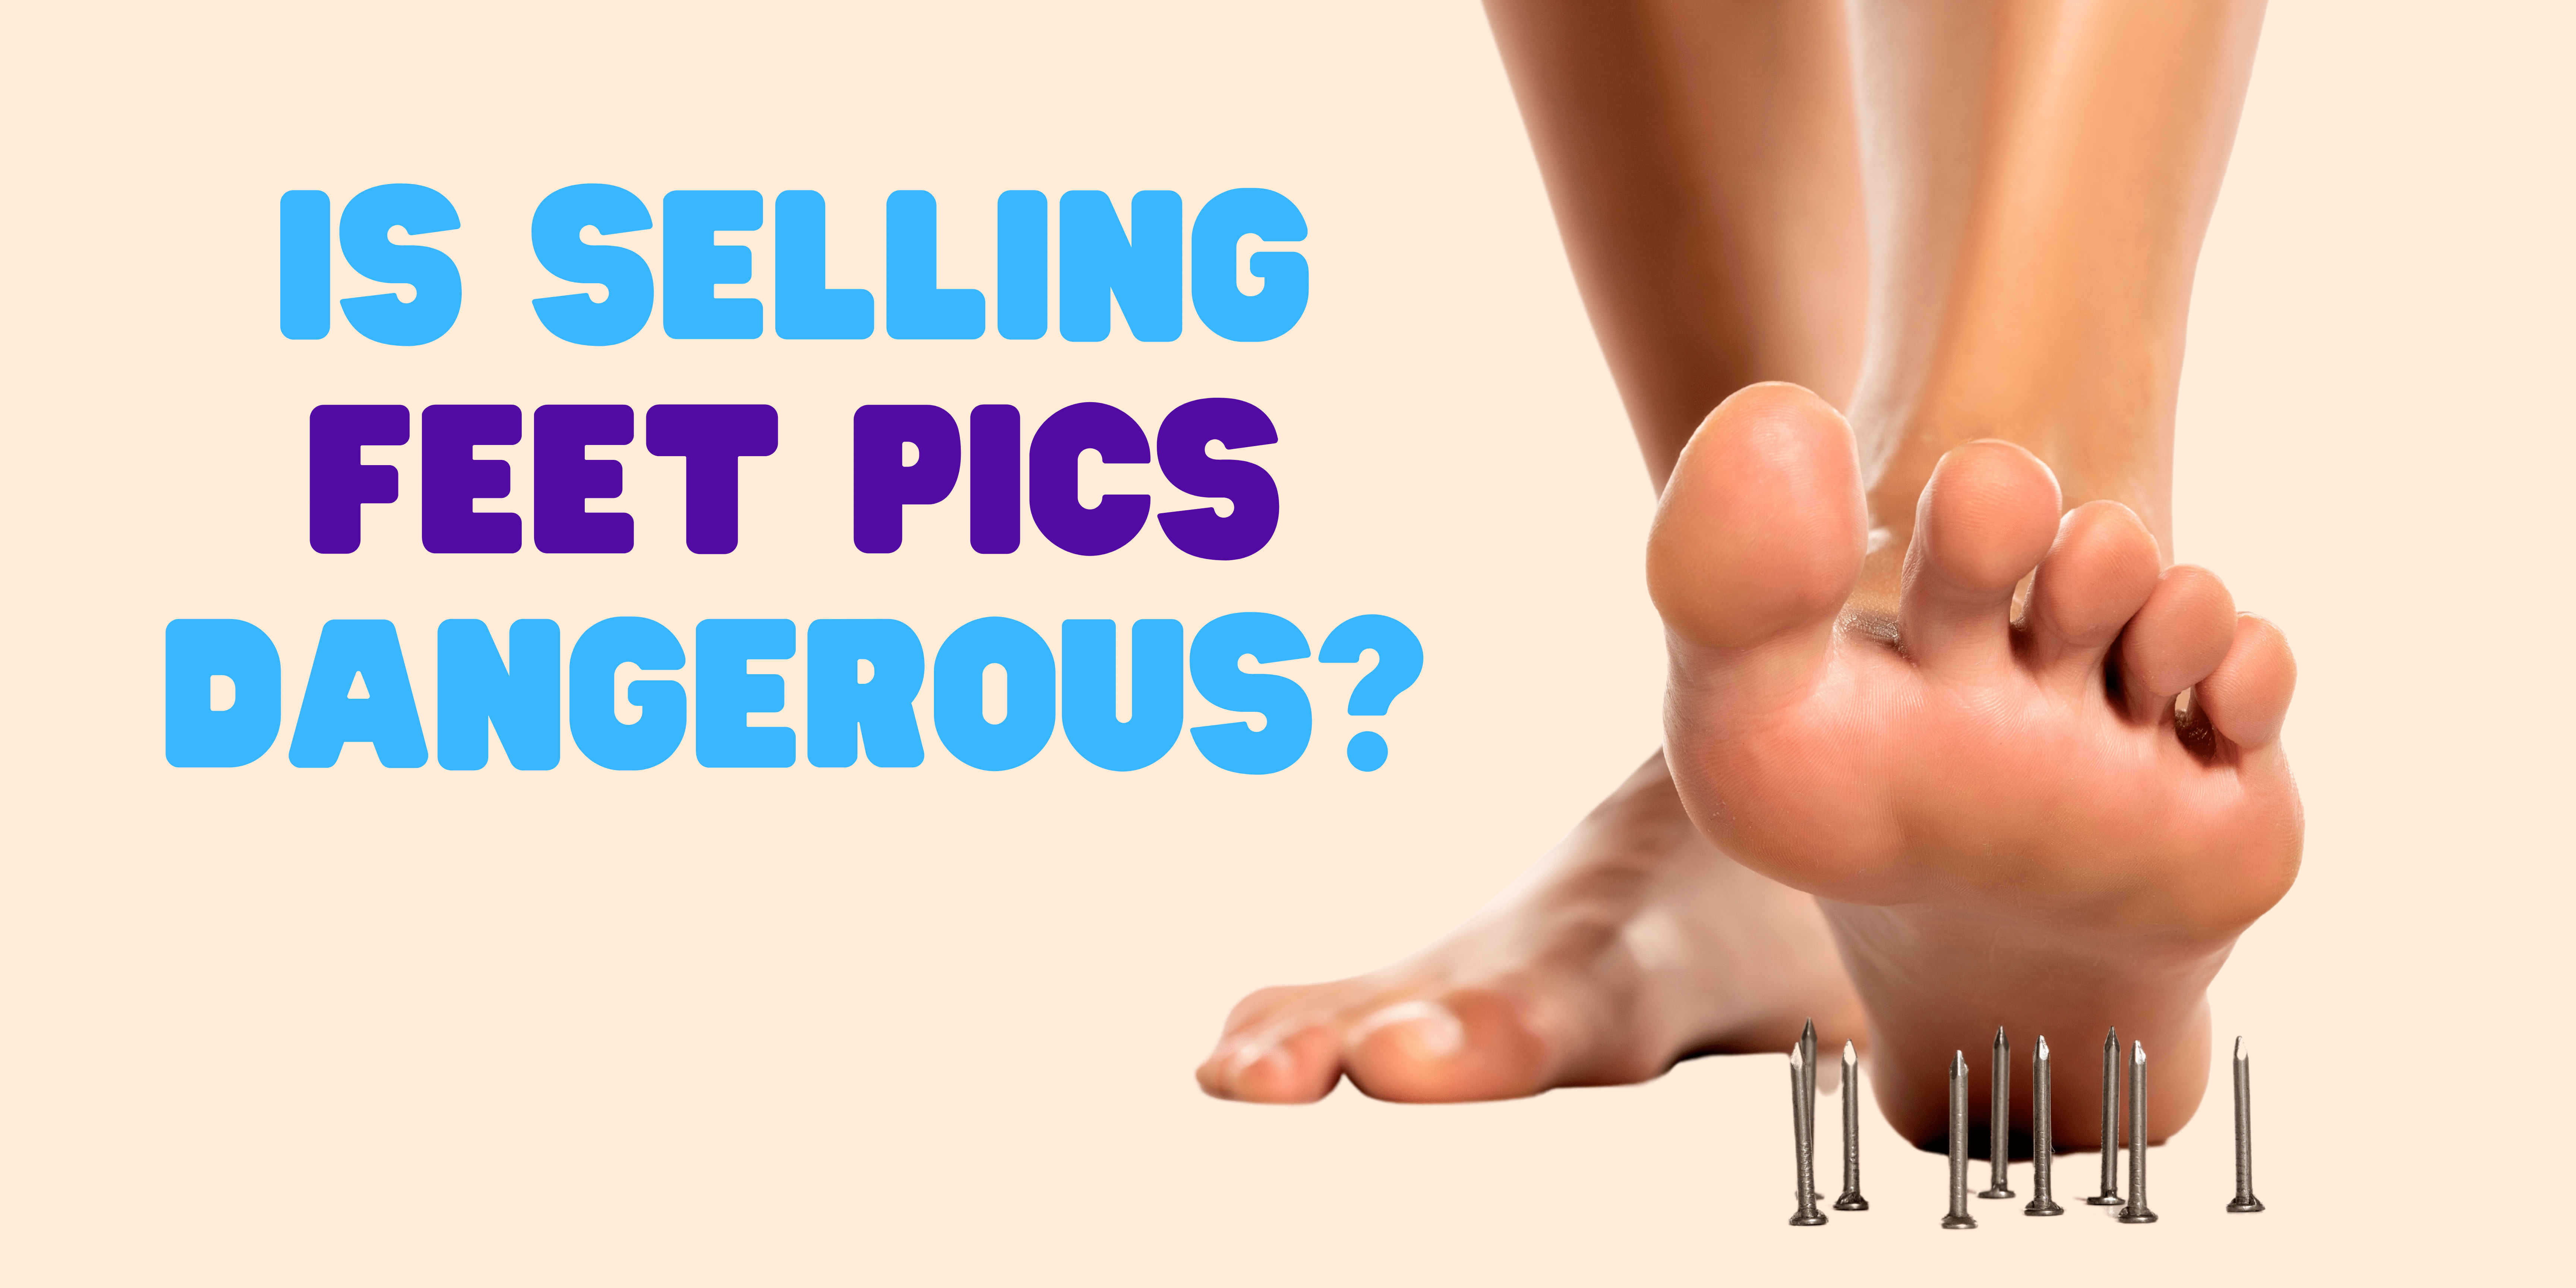 How to Sell Feet Pics Without Getting Scammed (The Inside Scoop!)